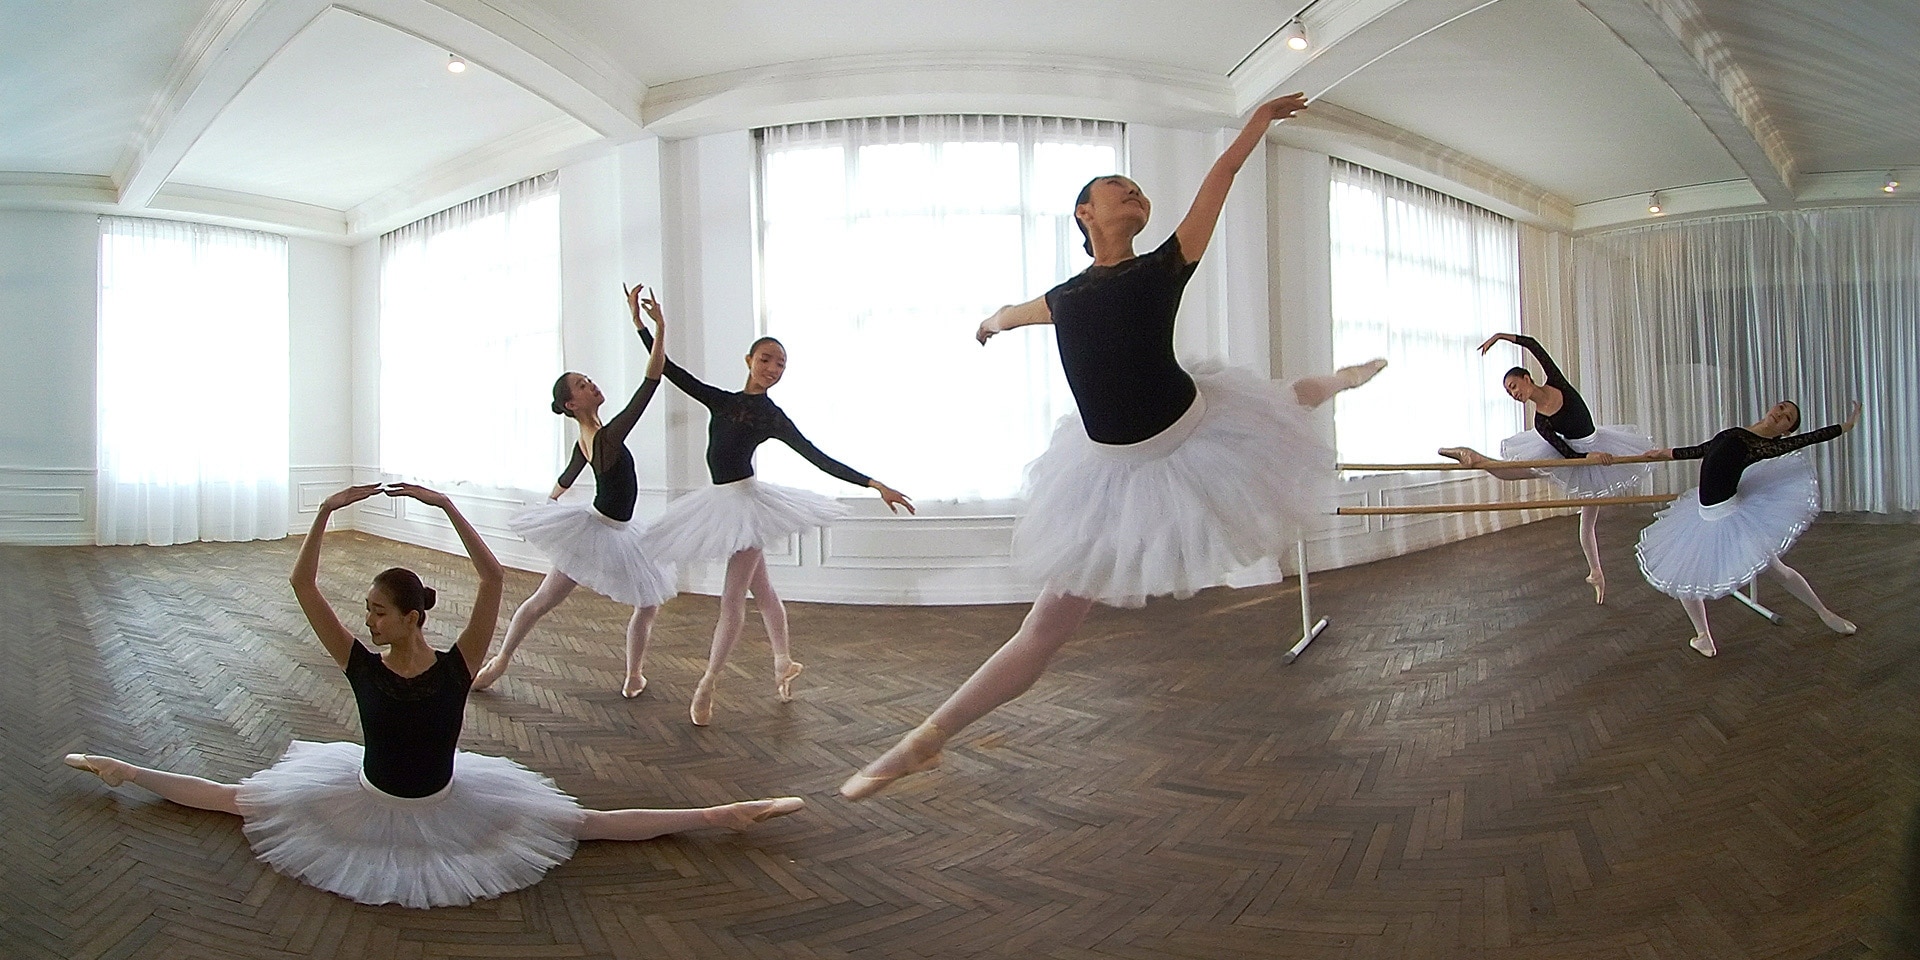 360 degree image of a ballet session